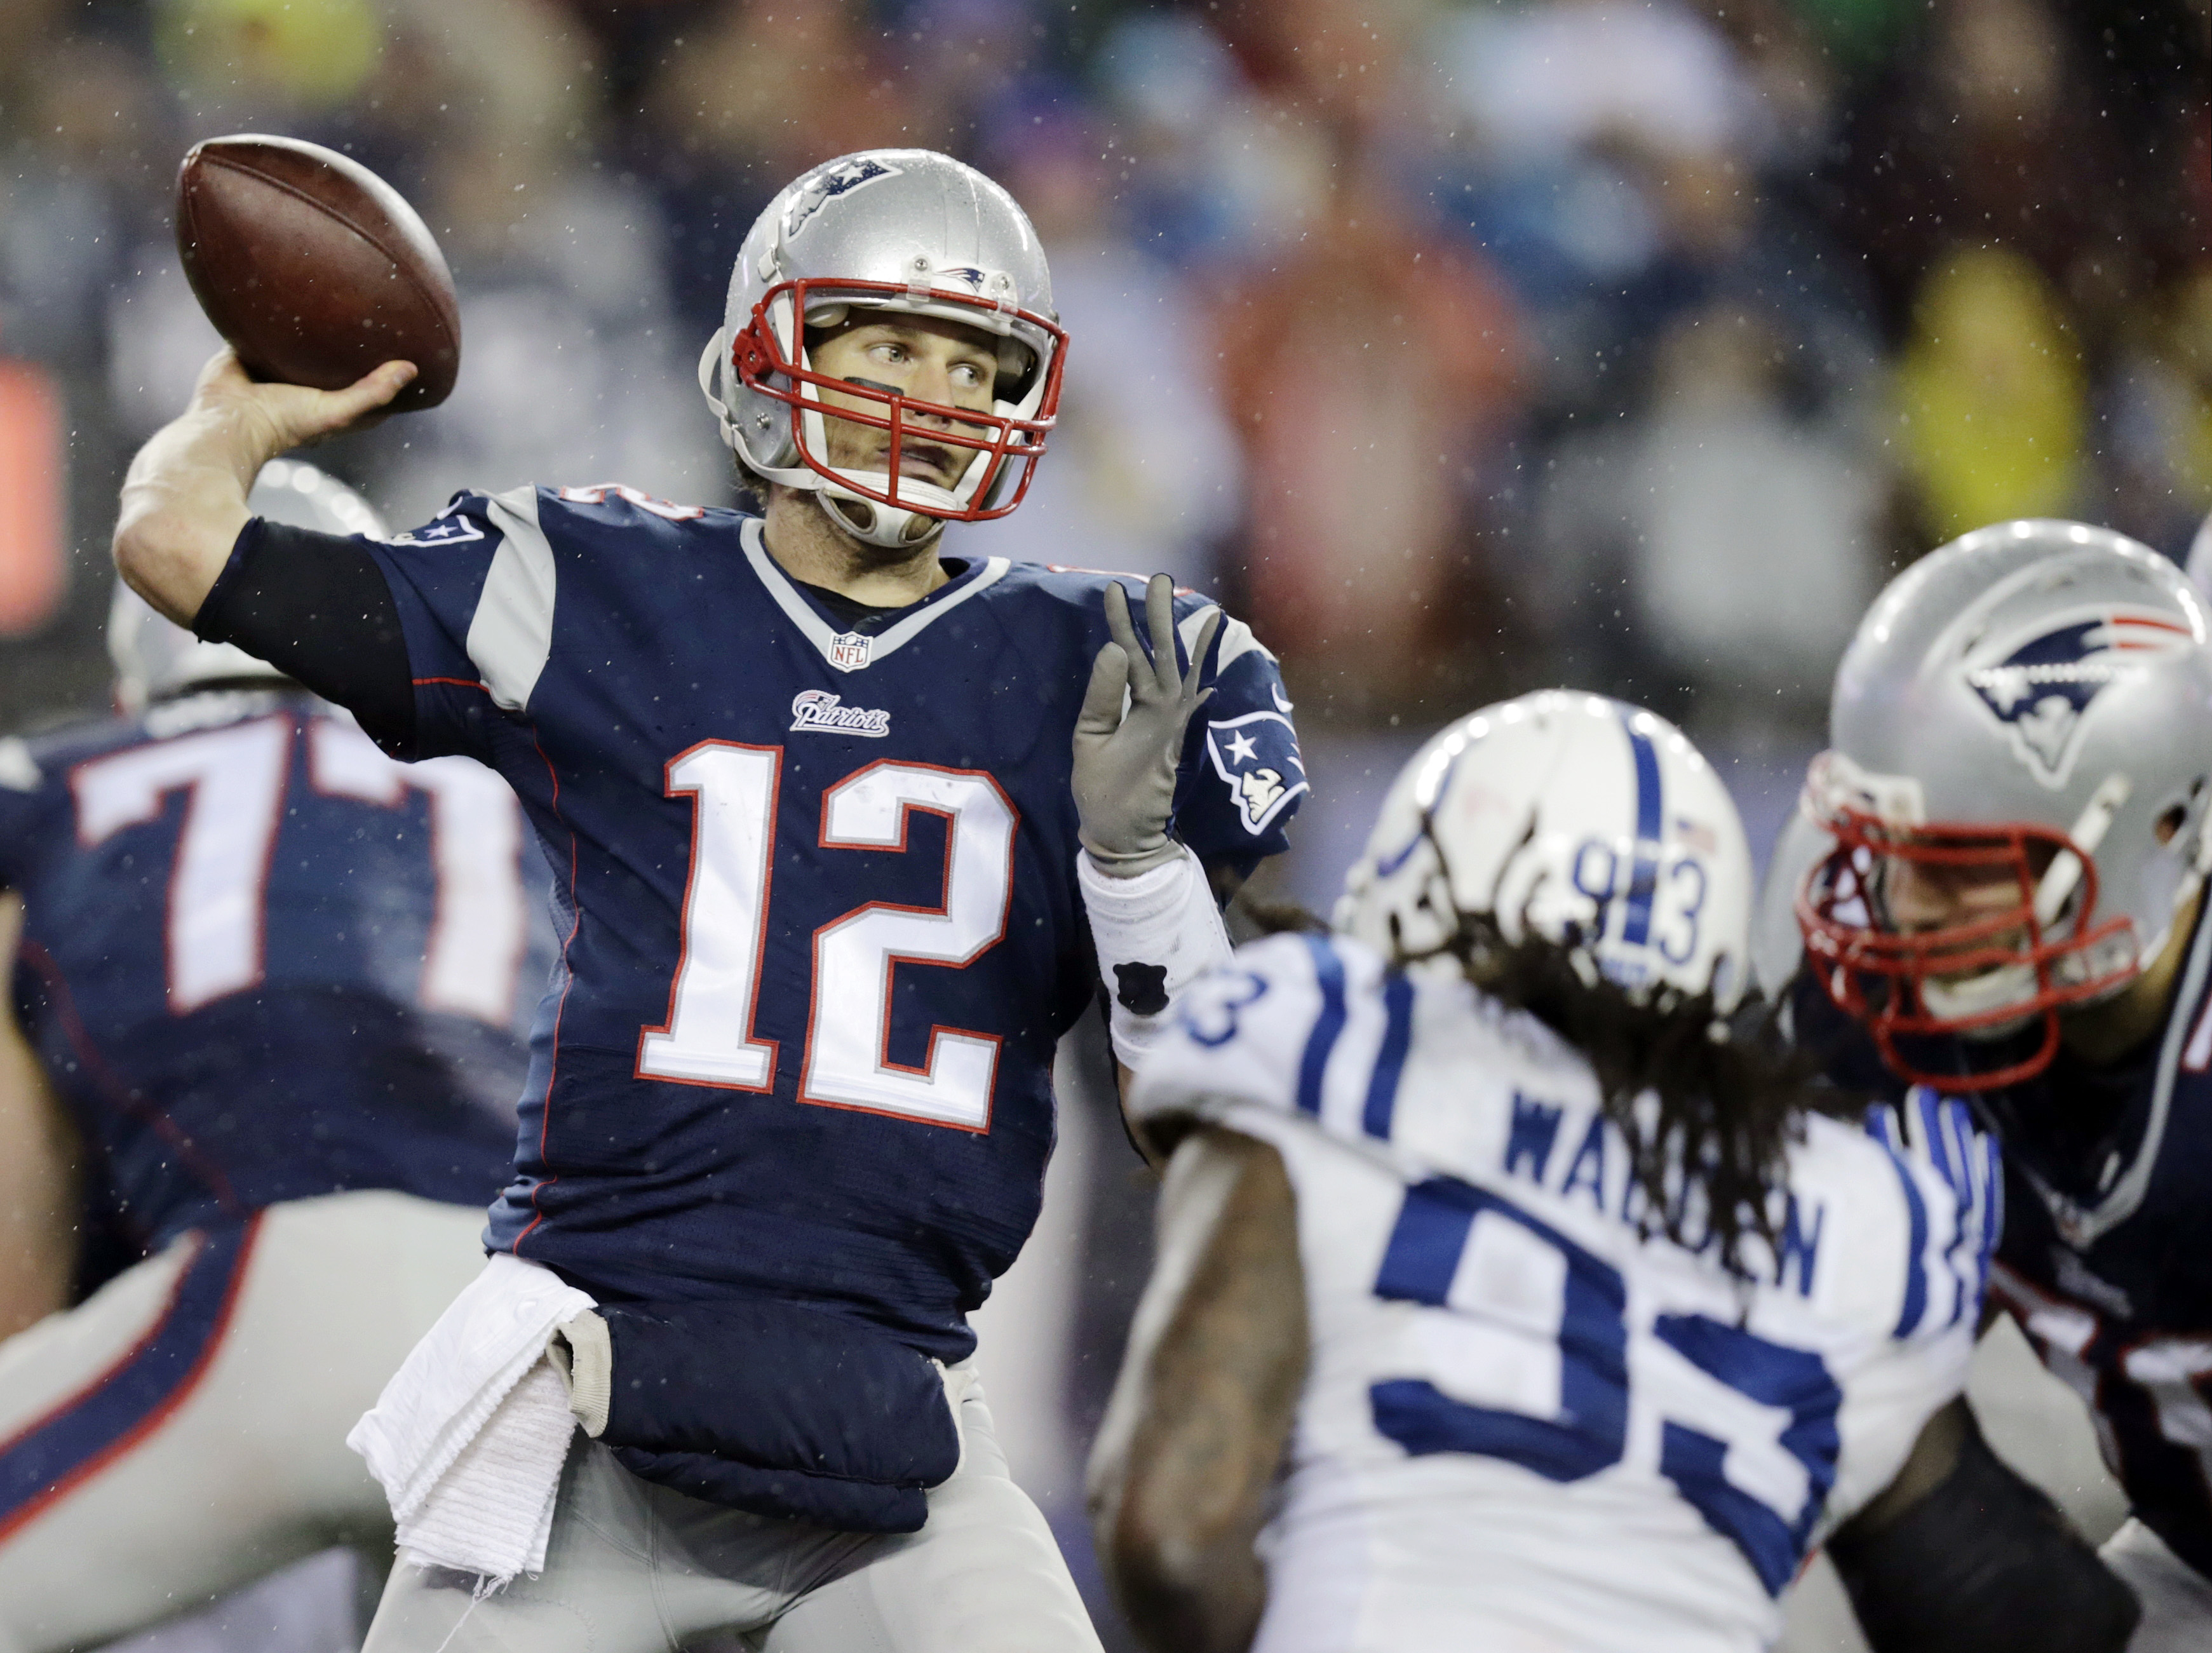 Patriots take AFC Championship over Colts 45-7 - CBS News